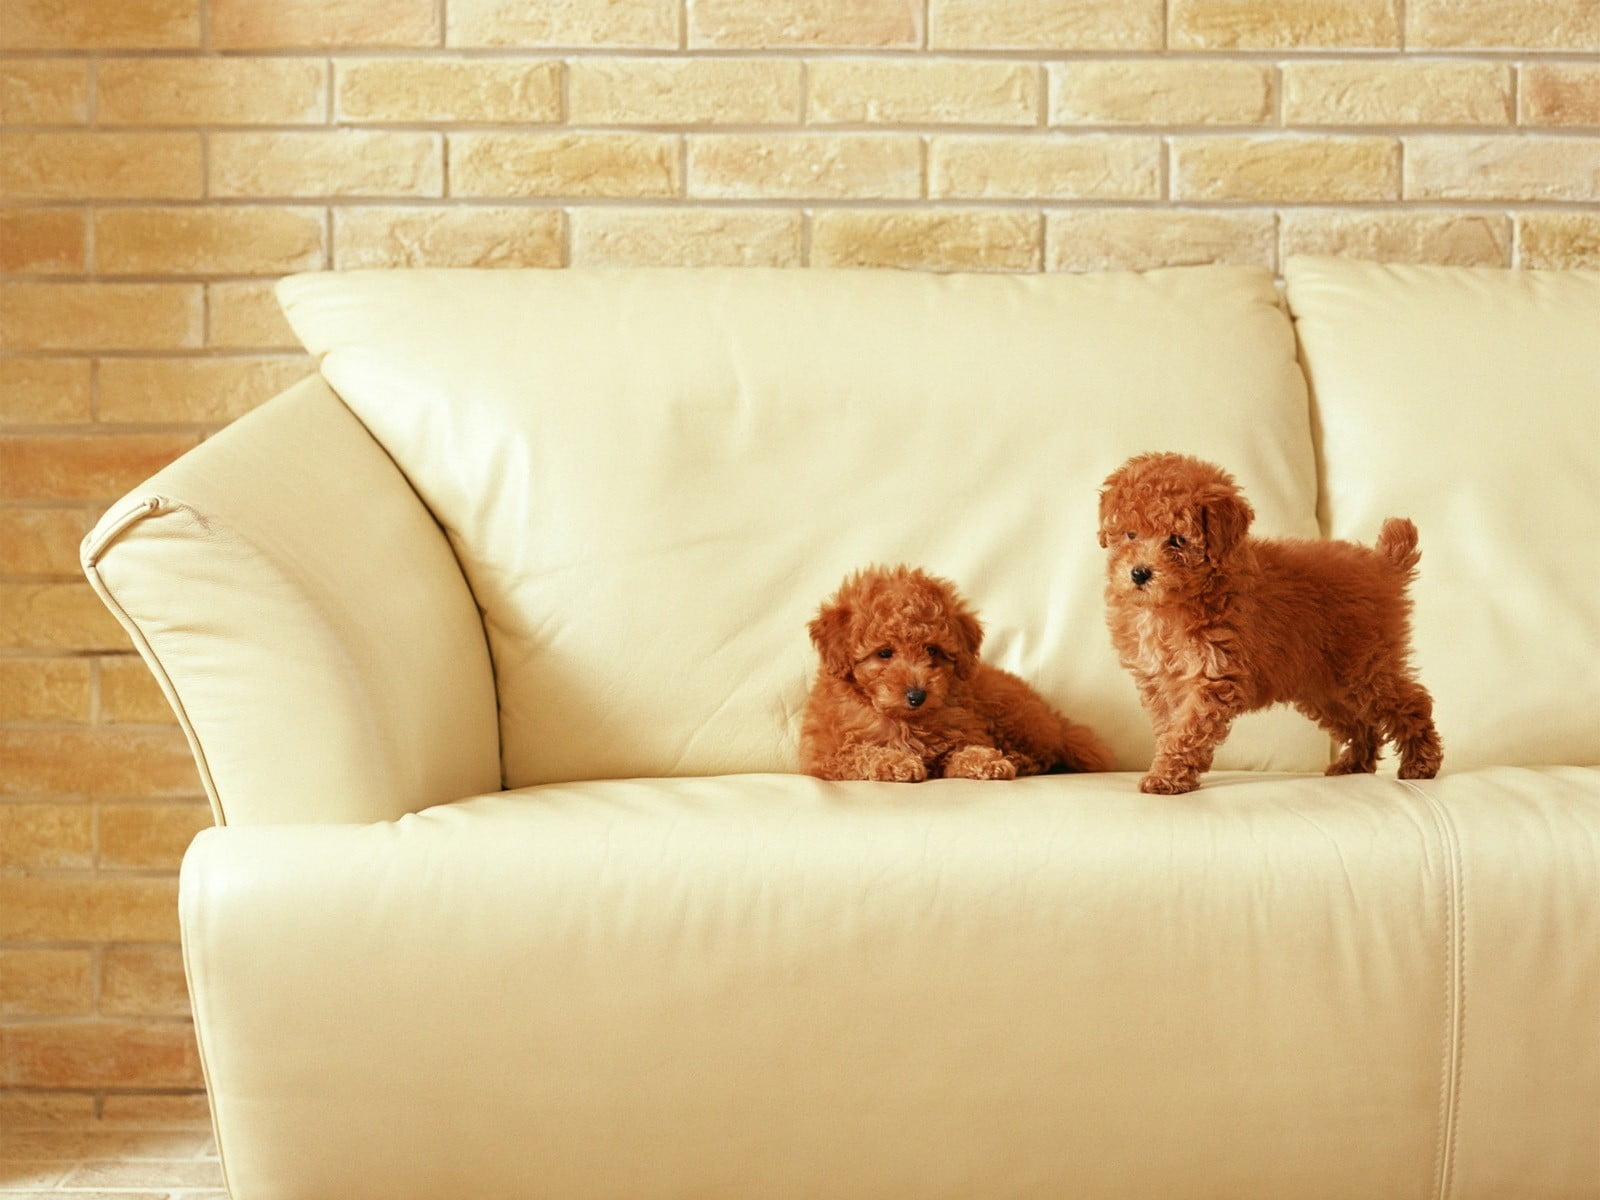 two brown short-coated puppies on white couch